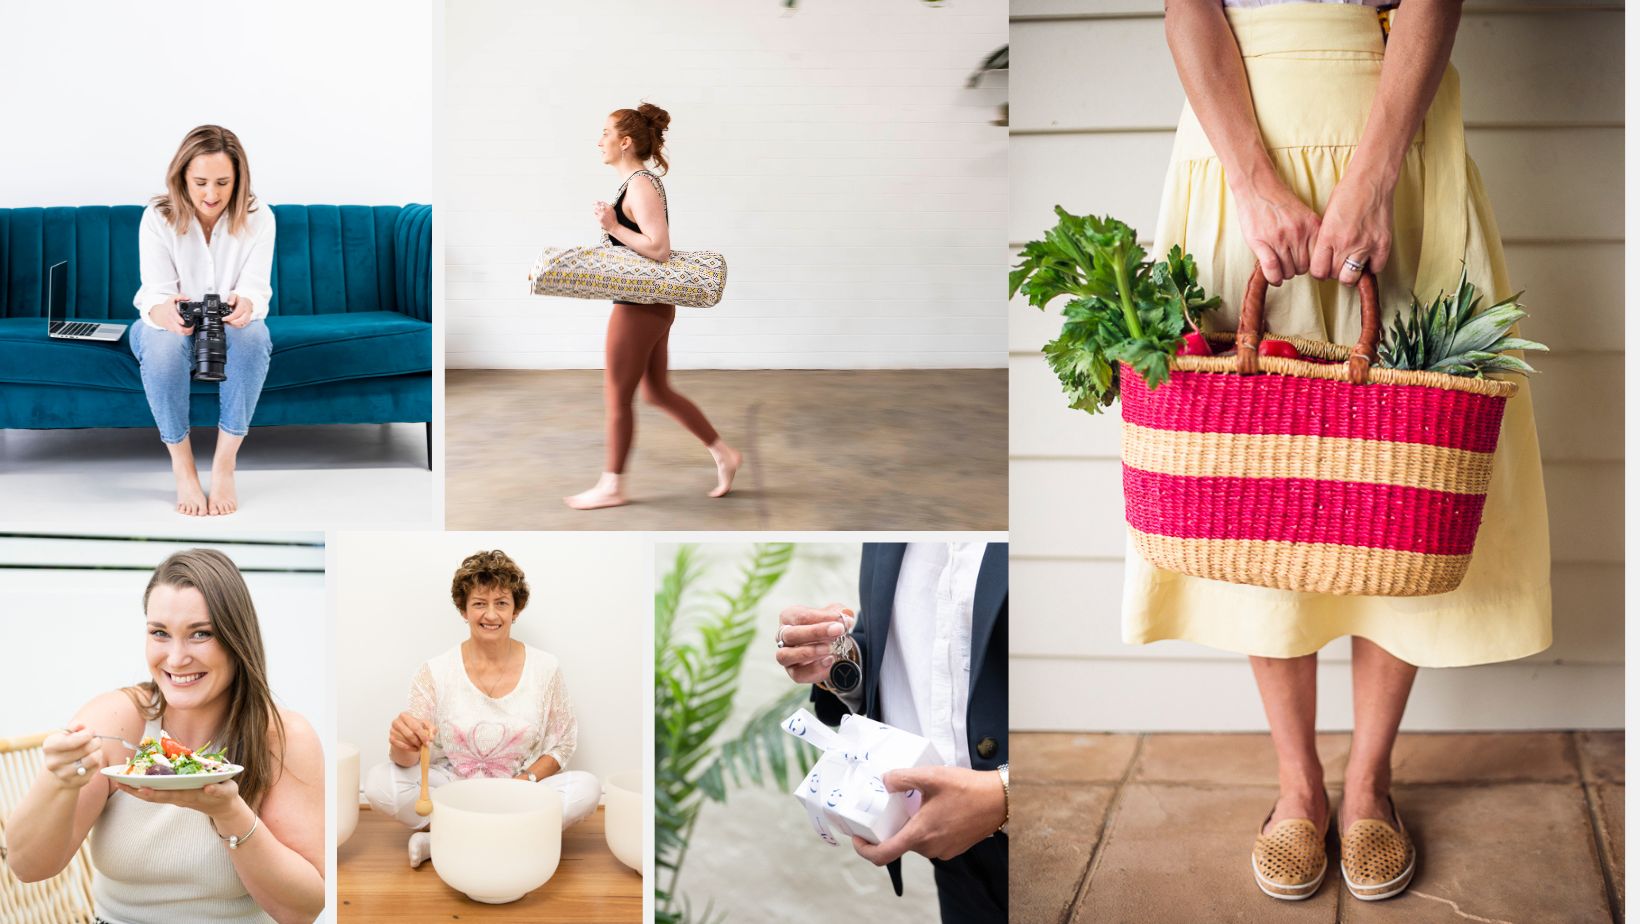 Props ideas for your personal branding shoot